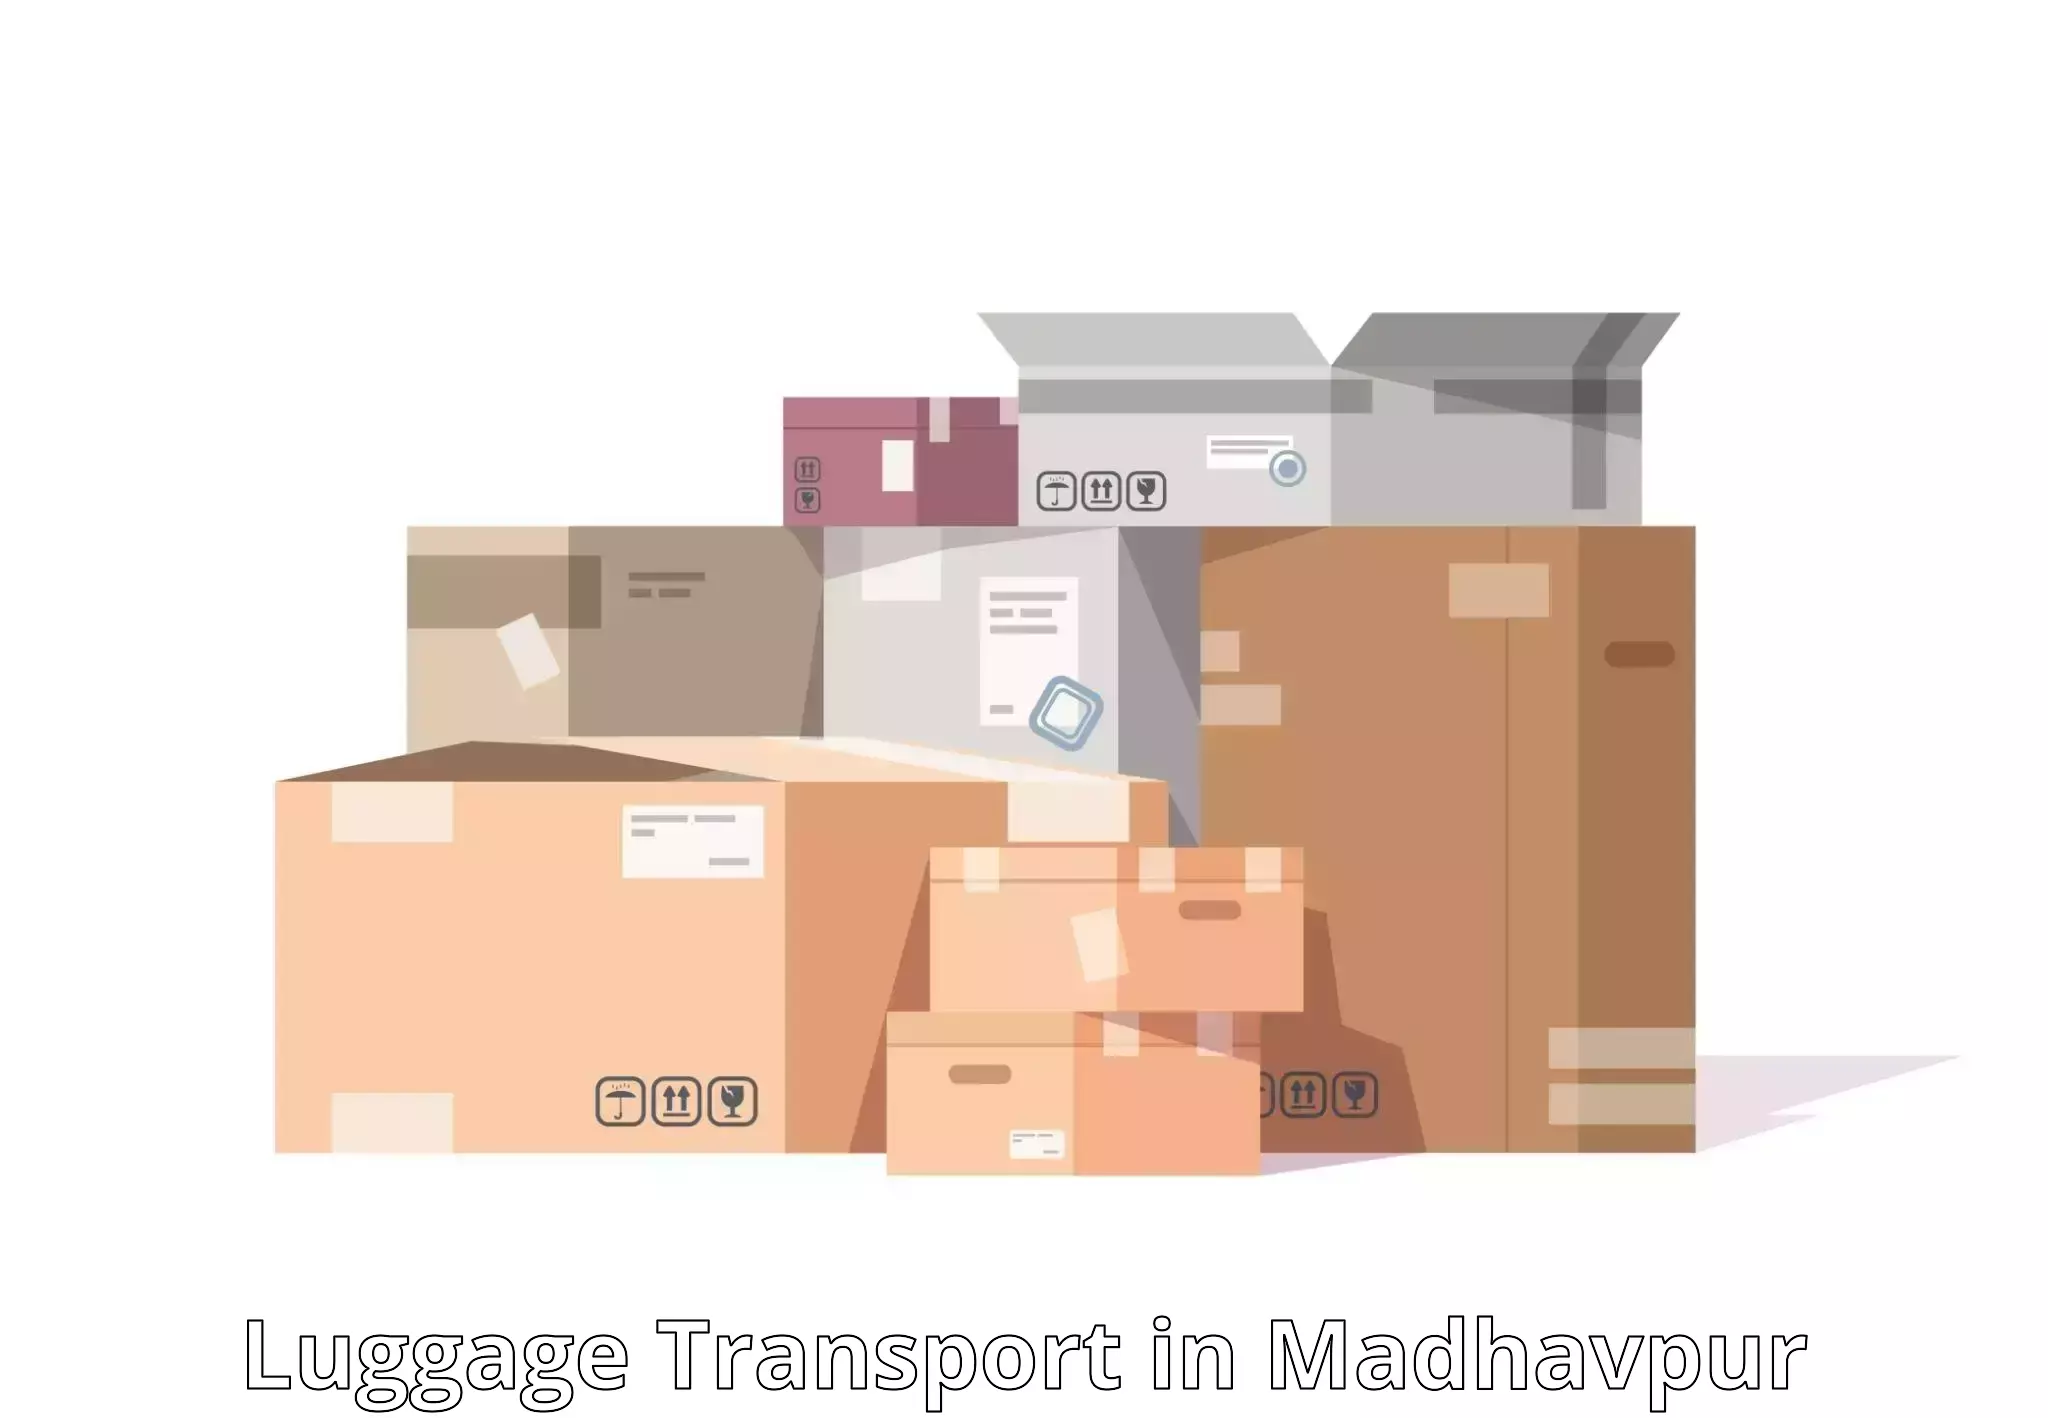 Luggage transfer service in Madhavpur